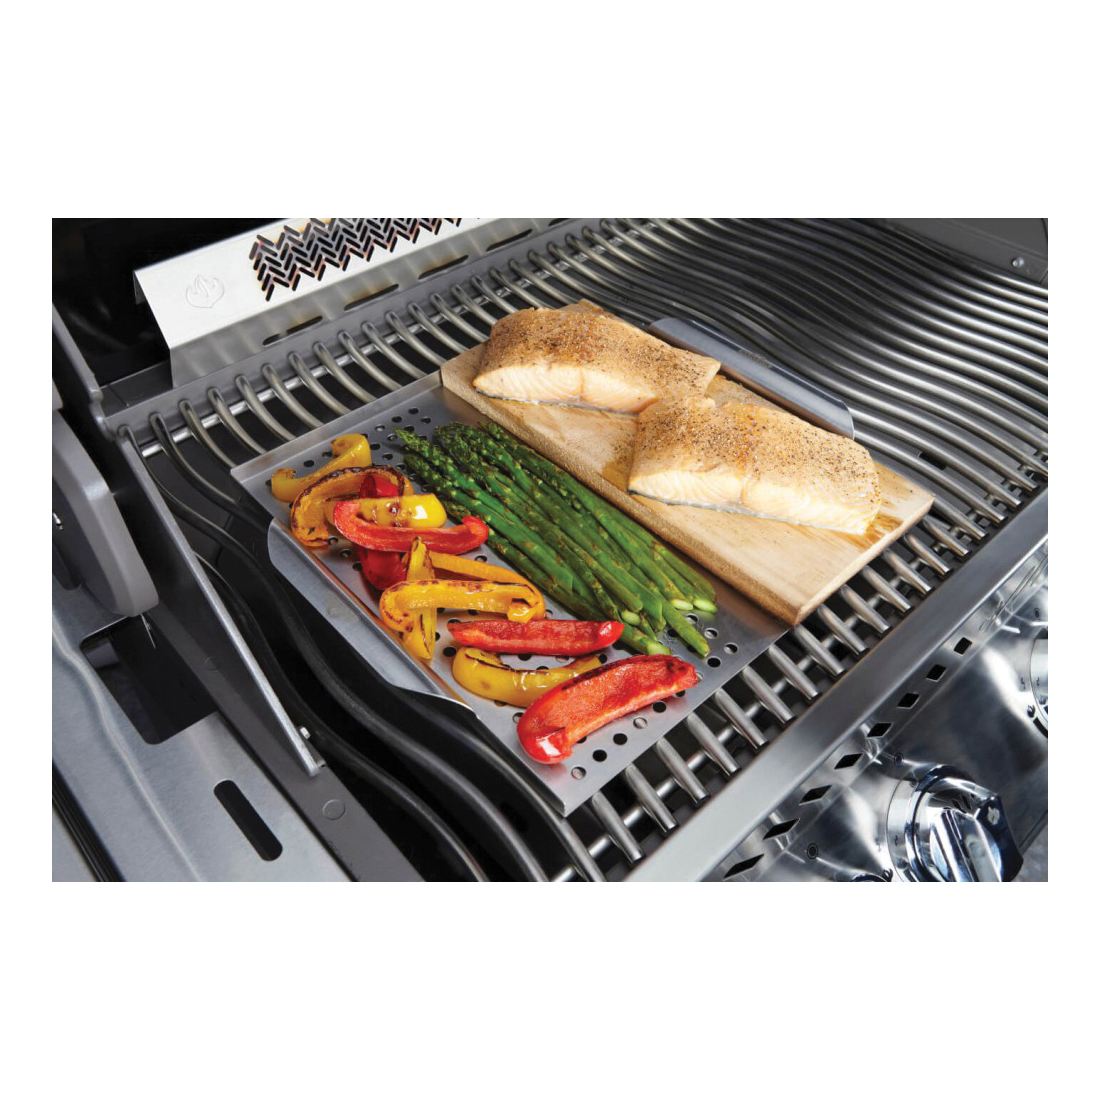 Napoleon 70026 Multi-Functional Grill Topper with Cedar Plank, Stainless Steel - 3